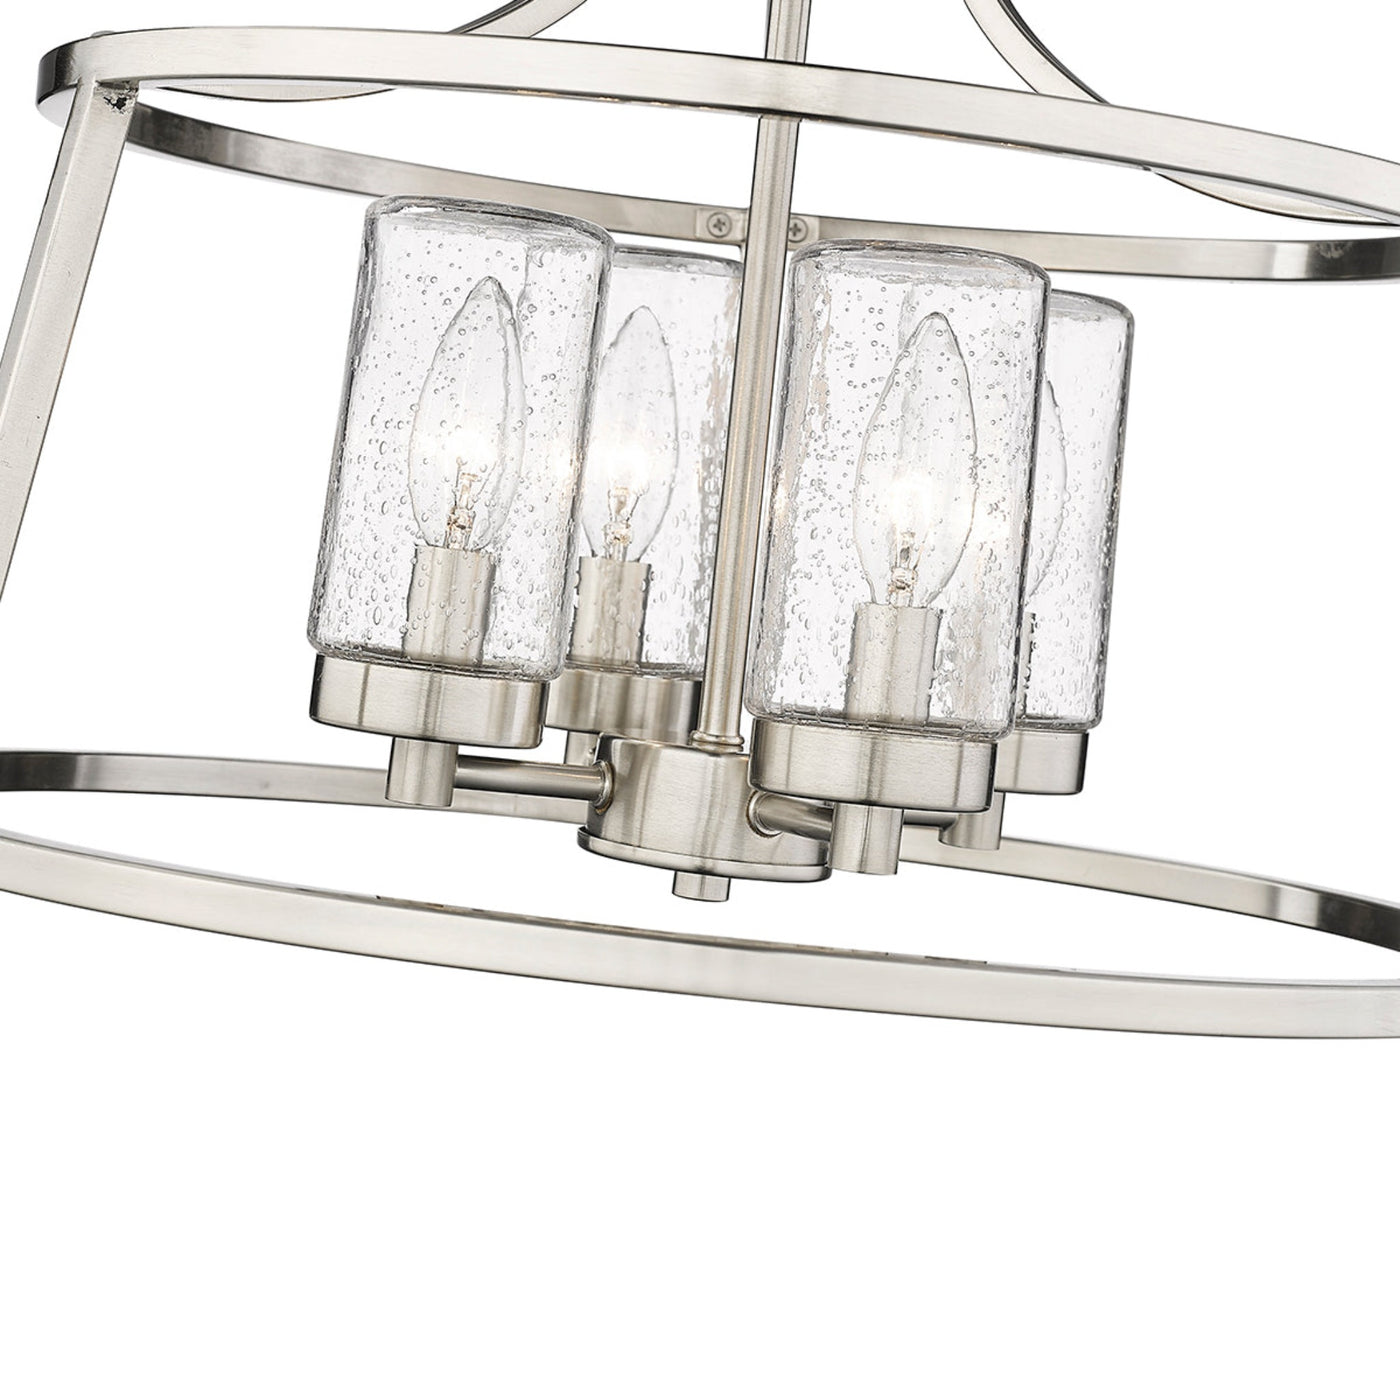 Millennium Lighting Four Light Semi Flush Mount Ceiling Light, Errol Collection, (Available in Brushed Nickel or Matte Black Finish)